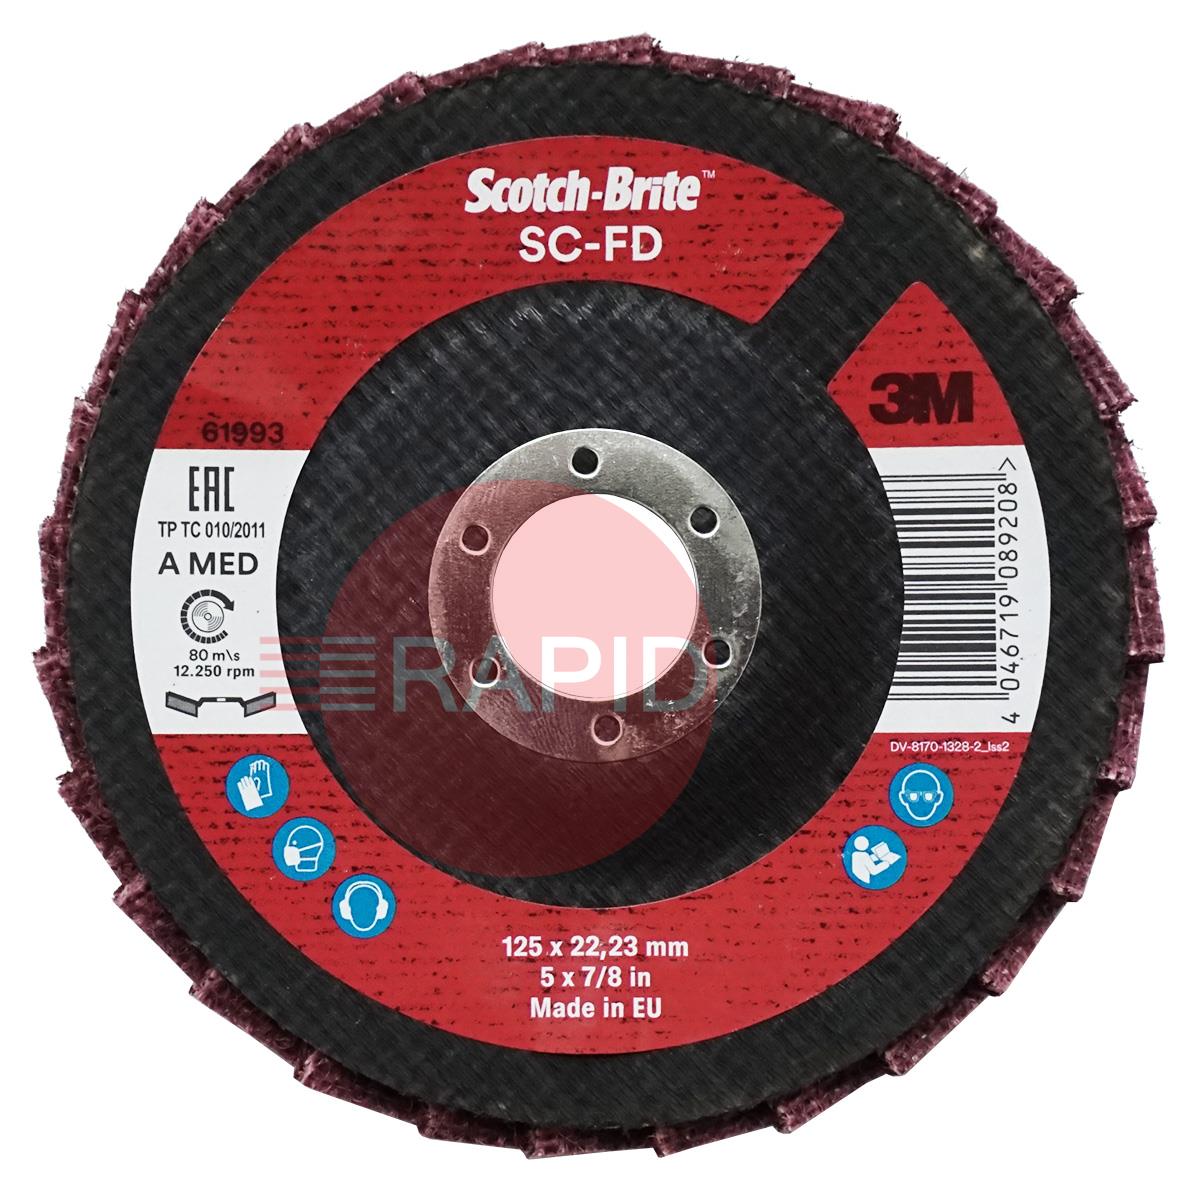 3M-61993  3M Scotch-Brite Surface Conditioning Flap Disc SC-FD, 125mm, A MED